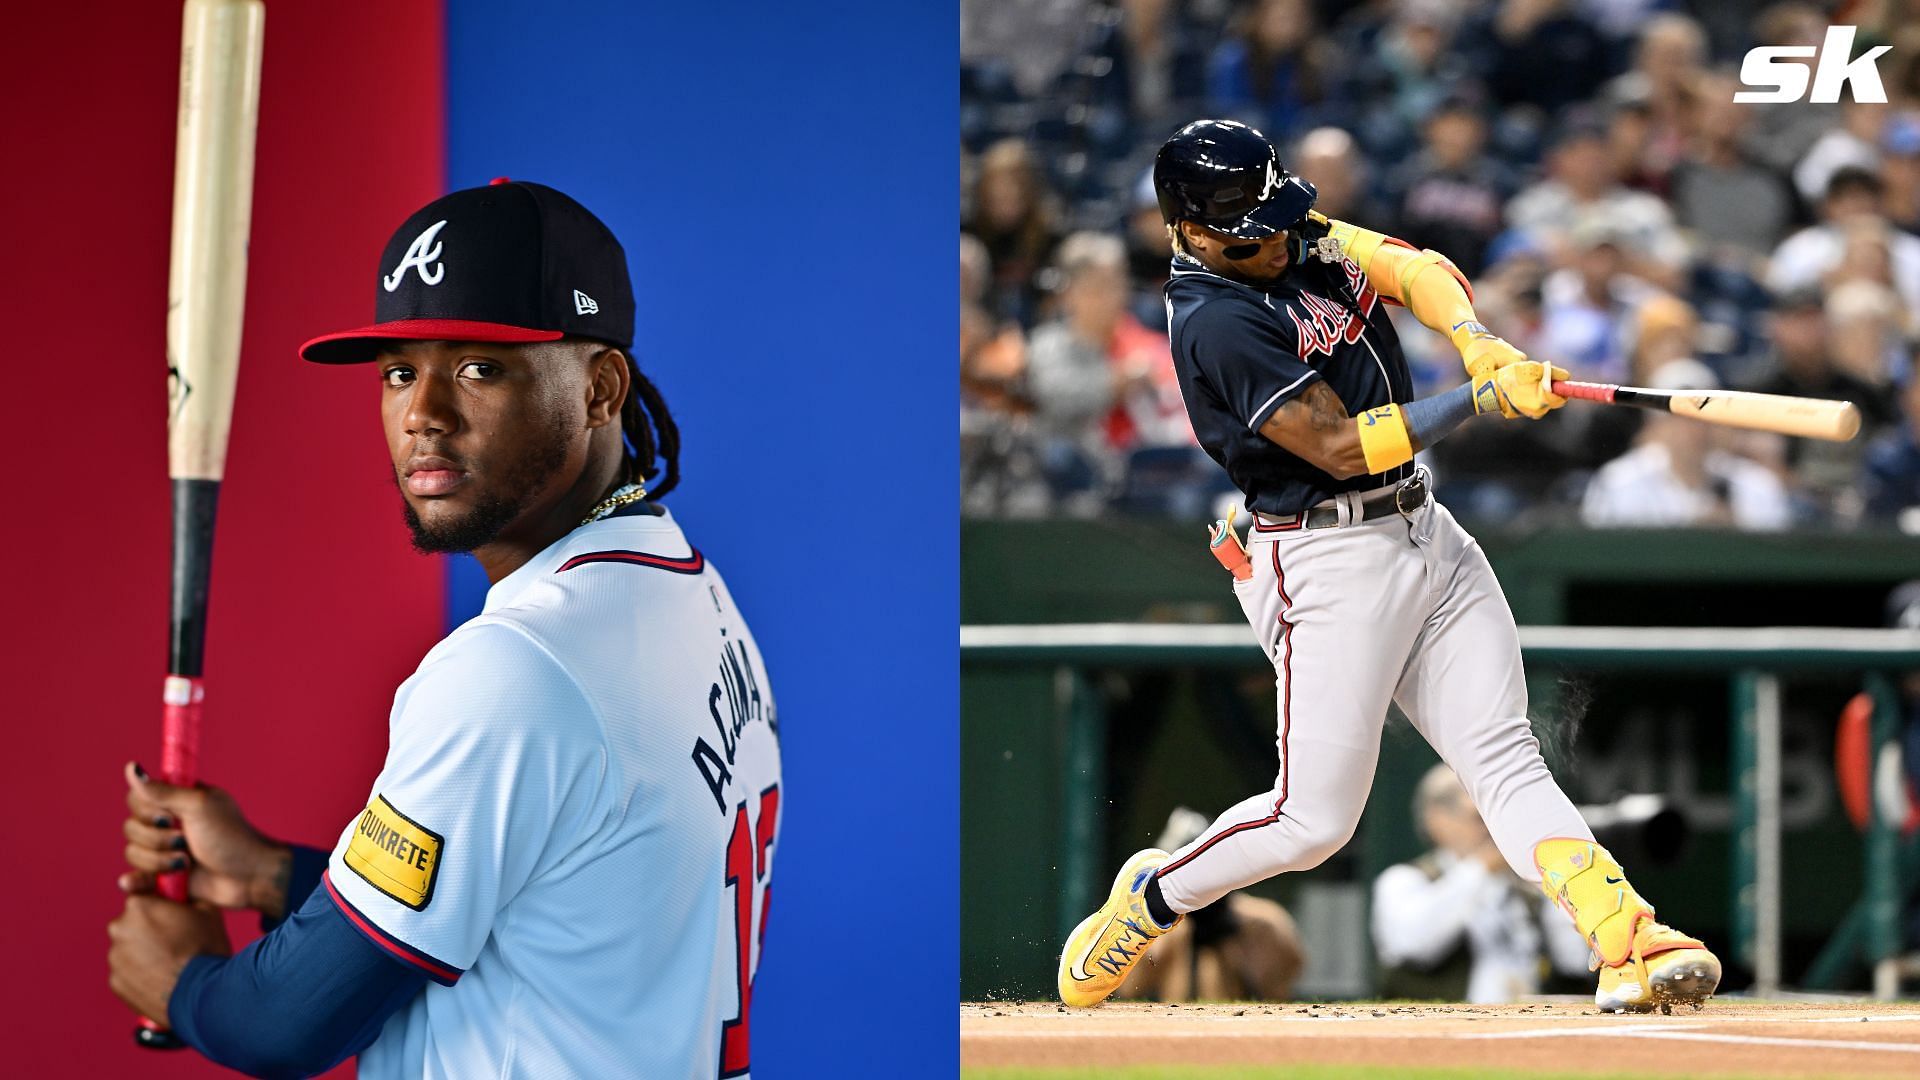 Braves fans rally behind Ronald Acuna Jr. after slugger shares optimistic message following injury